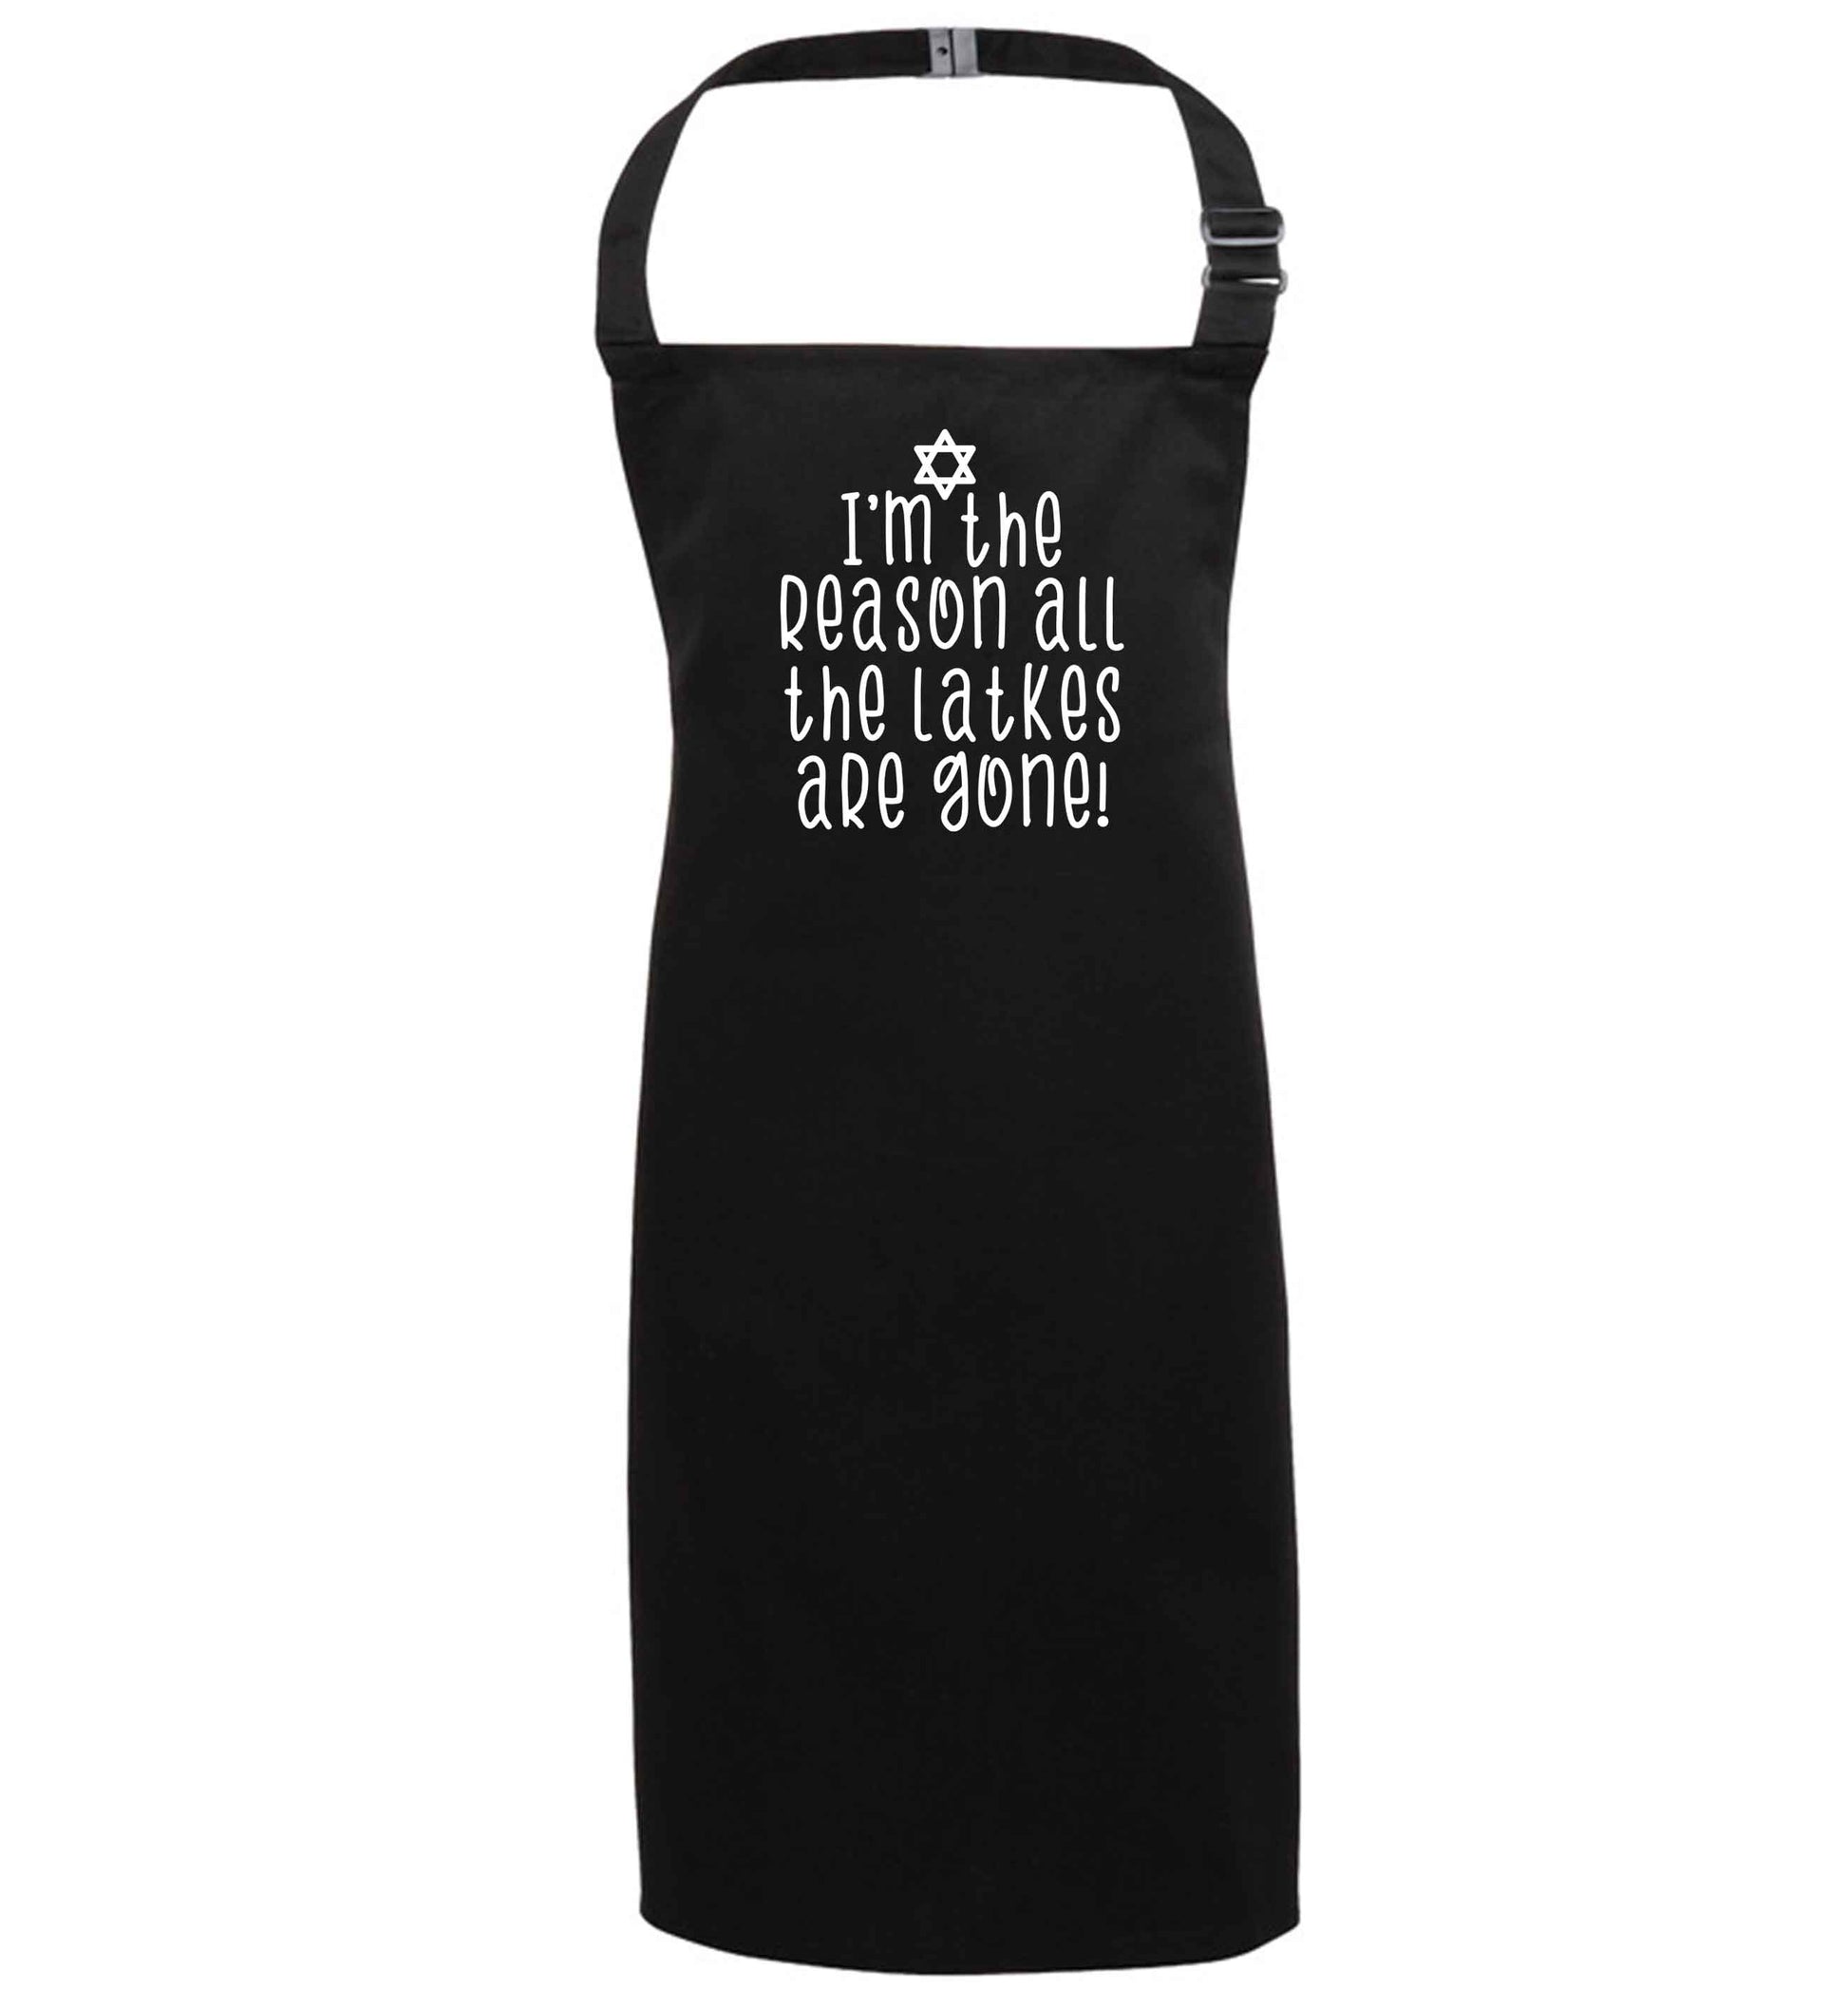 I'm the reason all the latkes are gone black apron 7-10 years